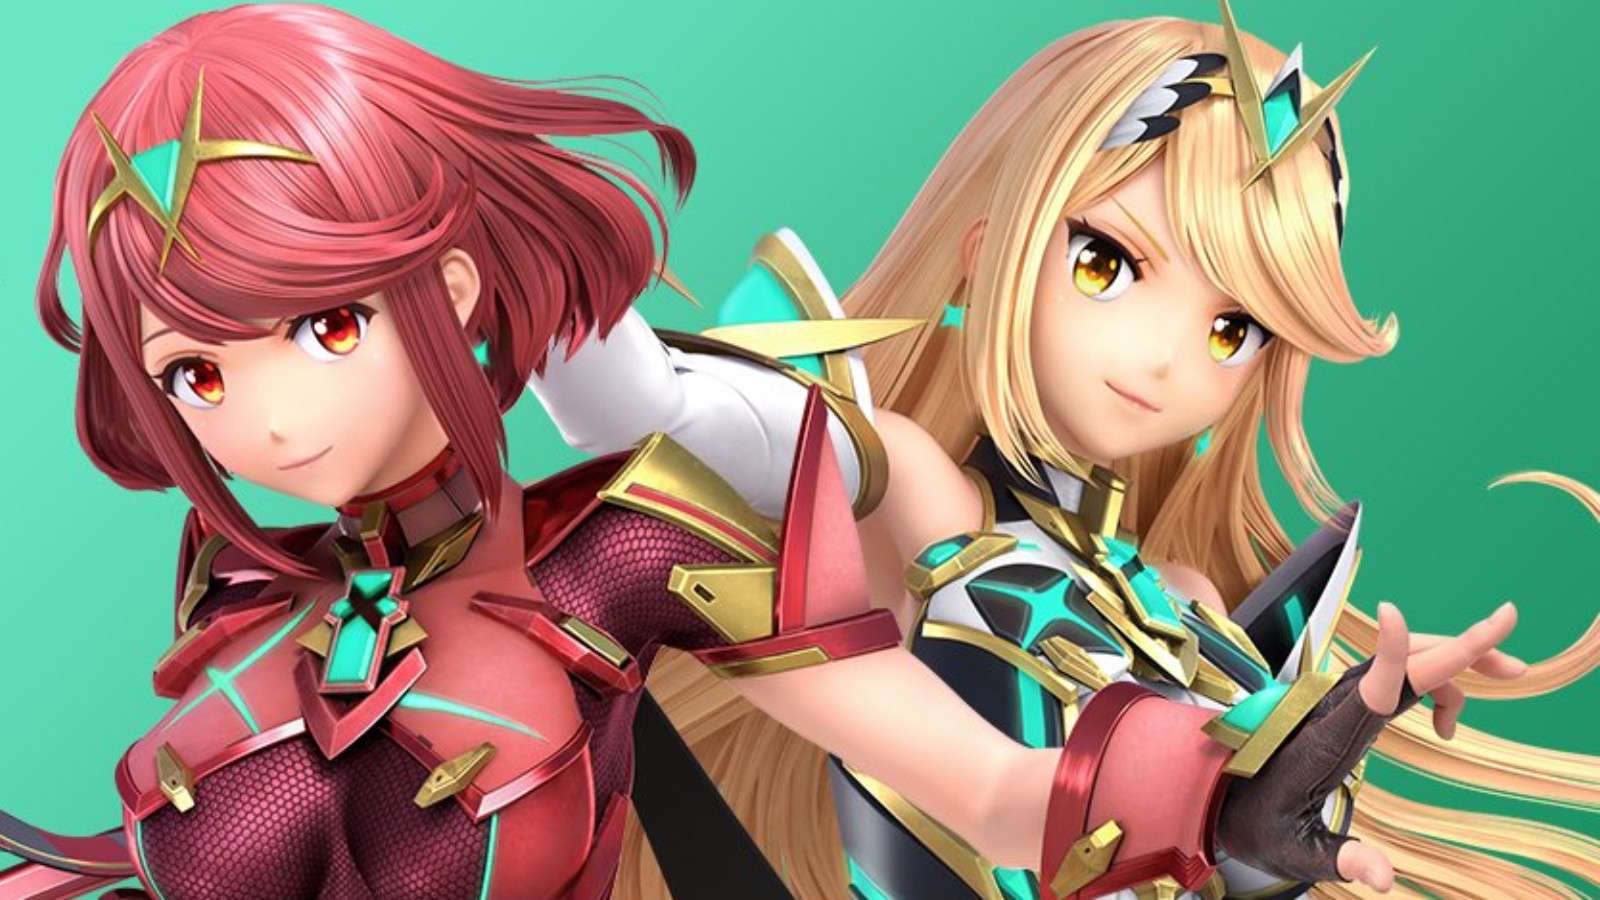 Pyra and Mythra in Smash Ultimate